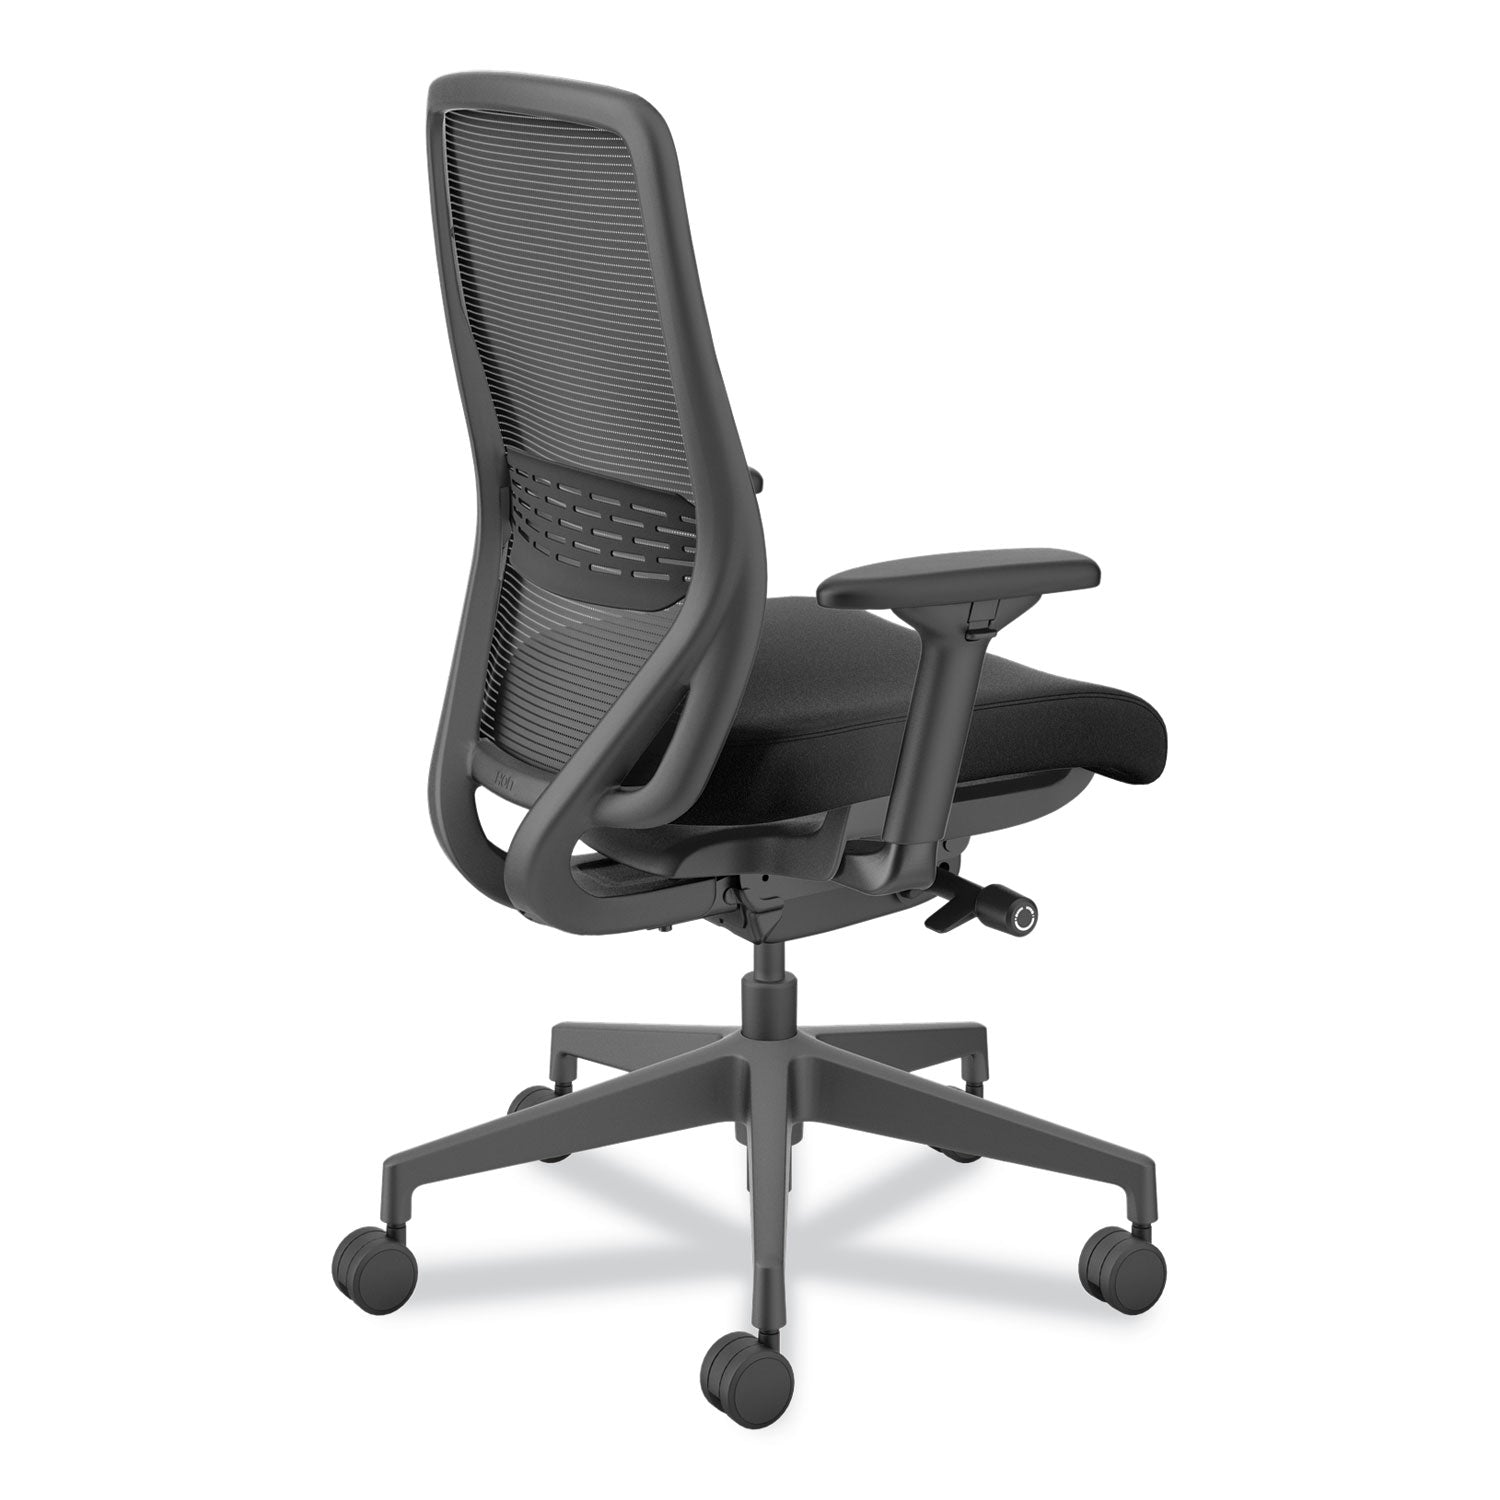 nucleus-series-recharge-task-chair-supports-up-to-300-lb-1663-to-2113-seat-height-black-seat-back-black-base_honnr12samc10bt - 4